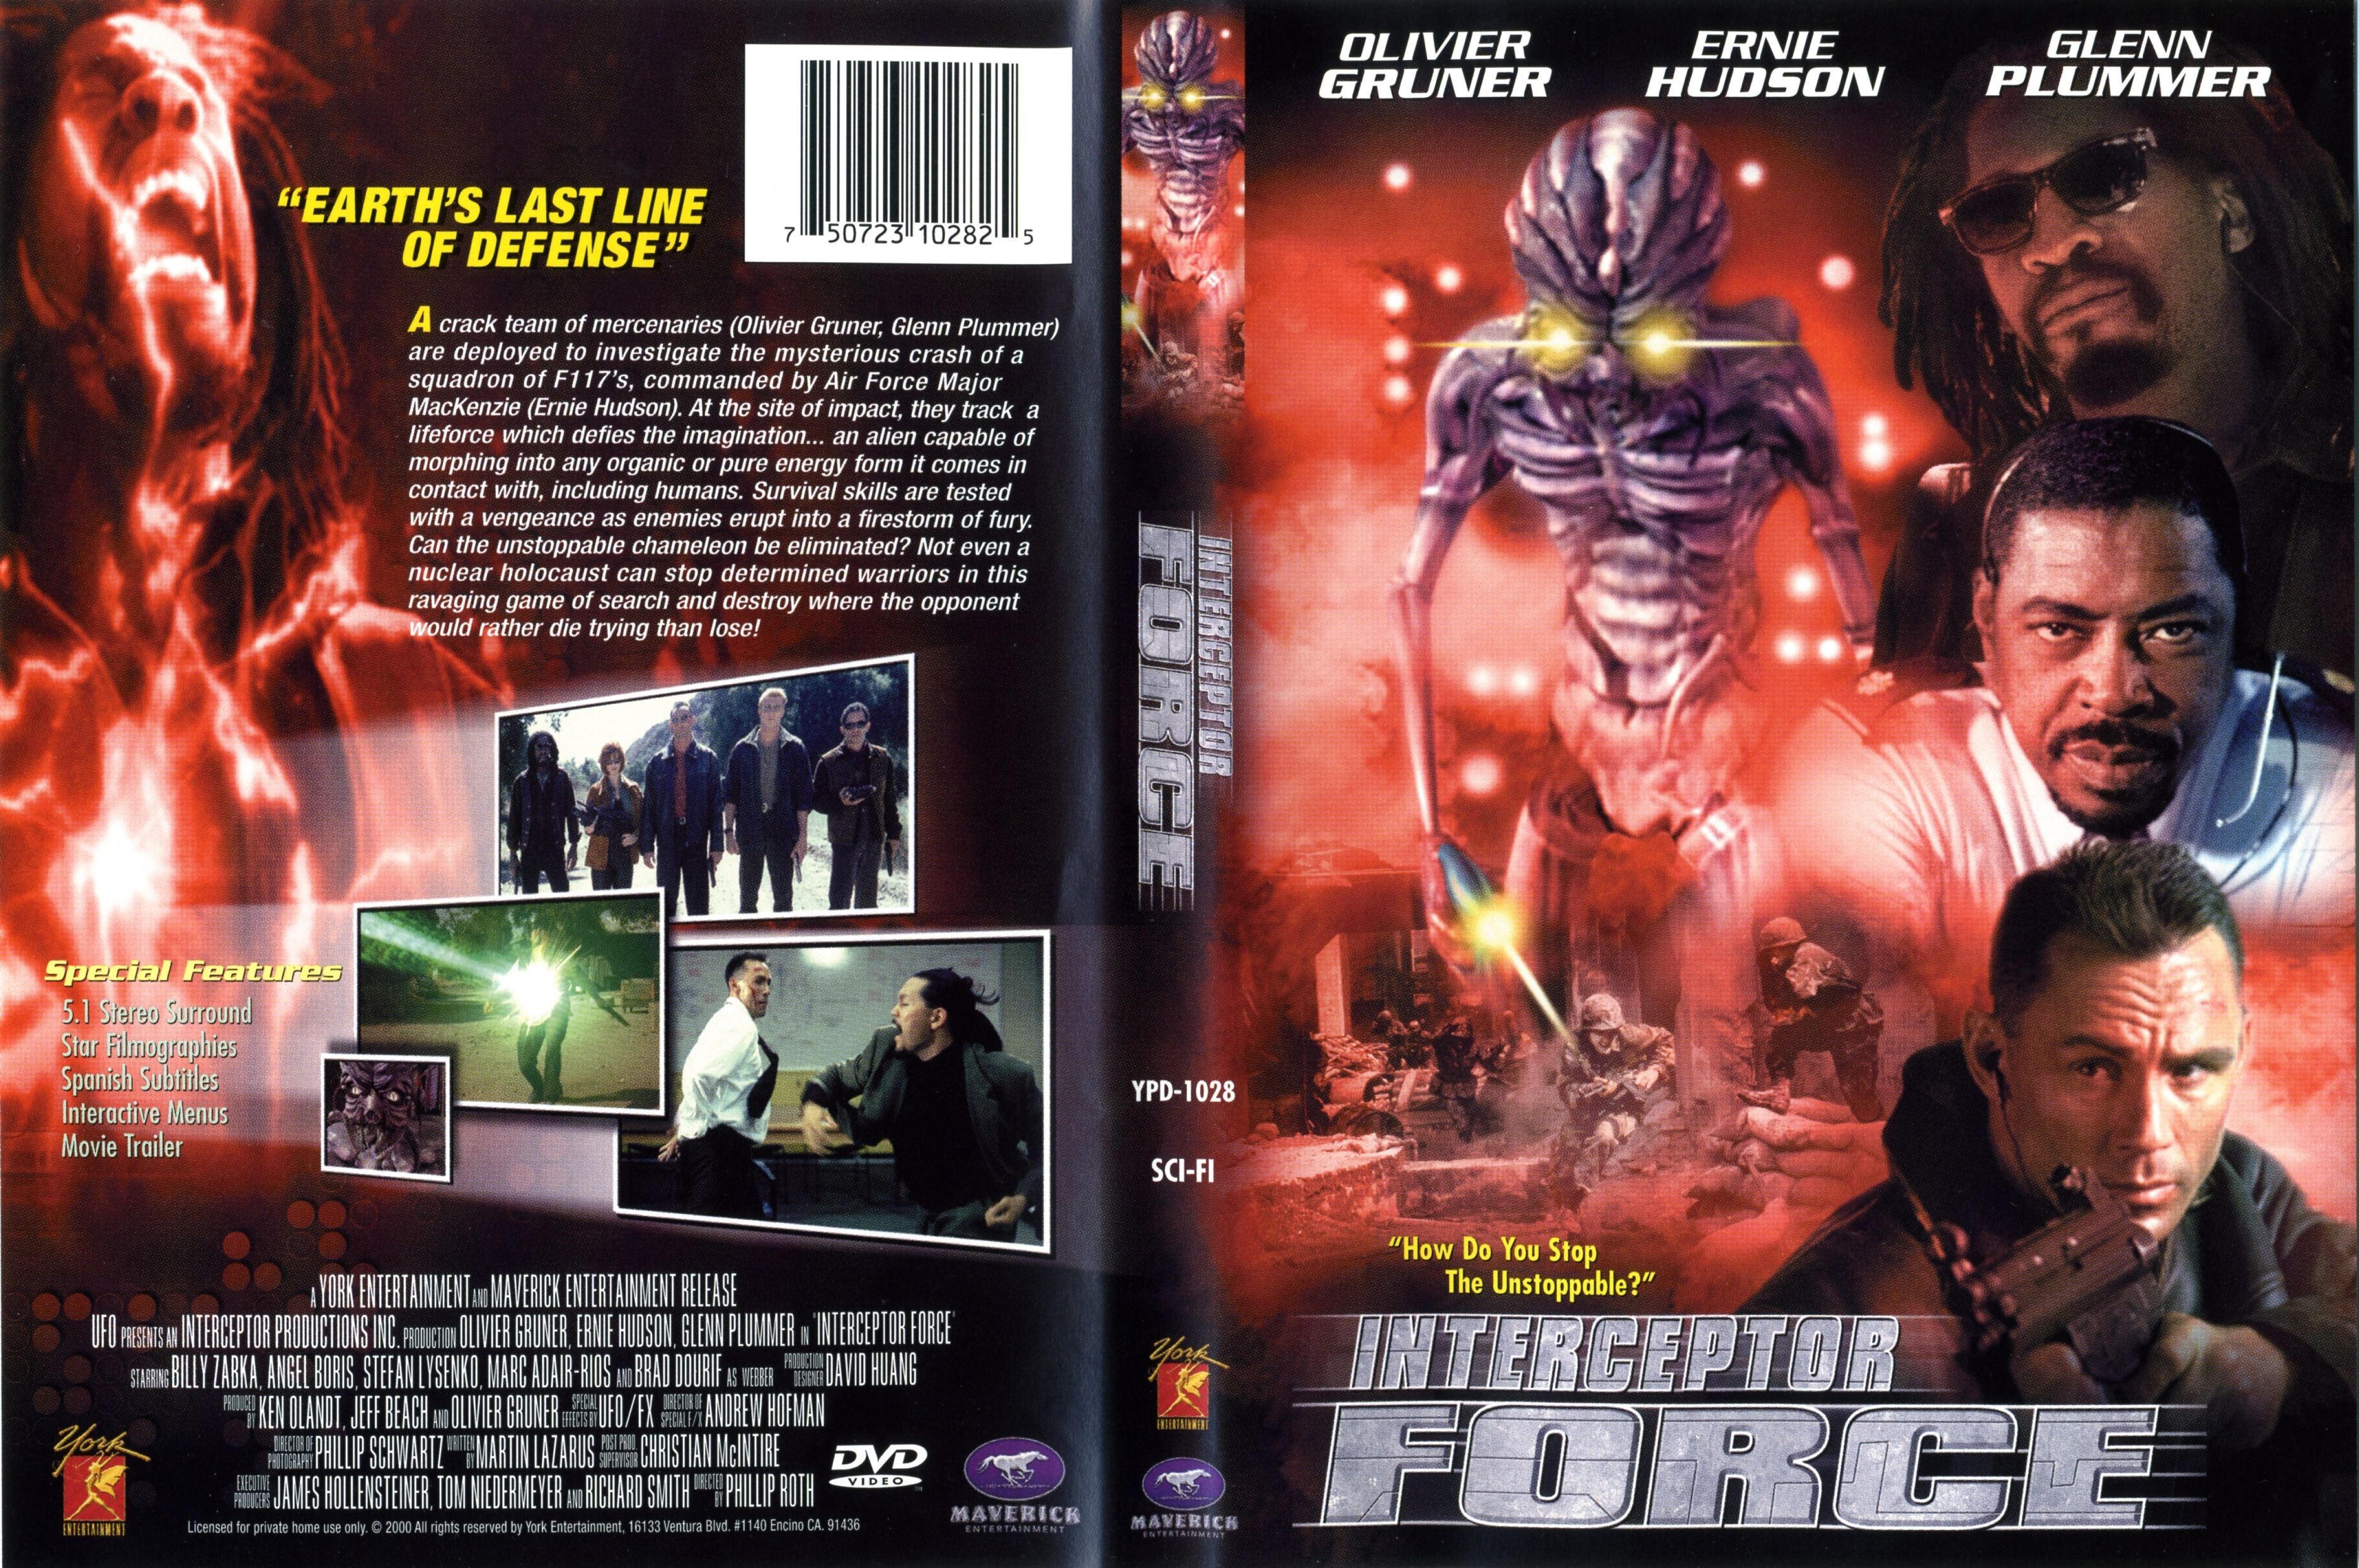 Interceptor Force DVD US1 | DVD Covers | Cover Century | Over 1.000.000 ...